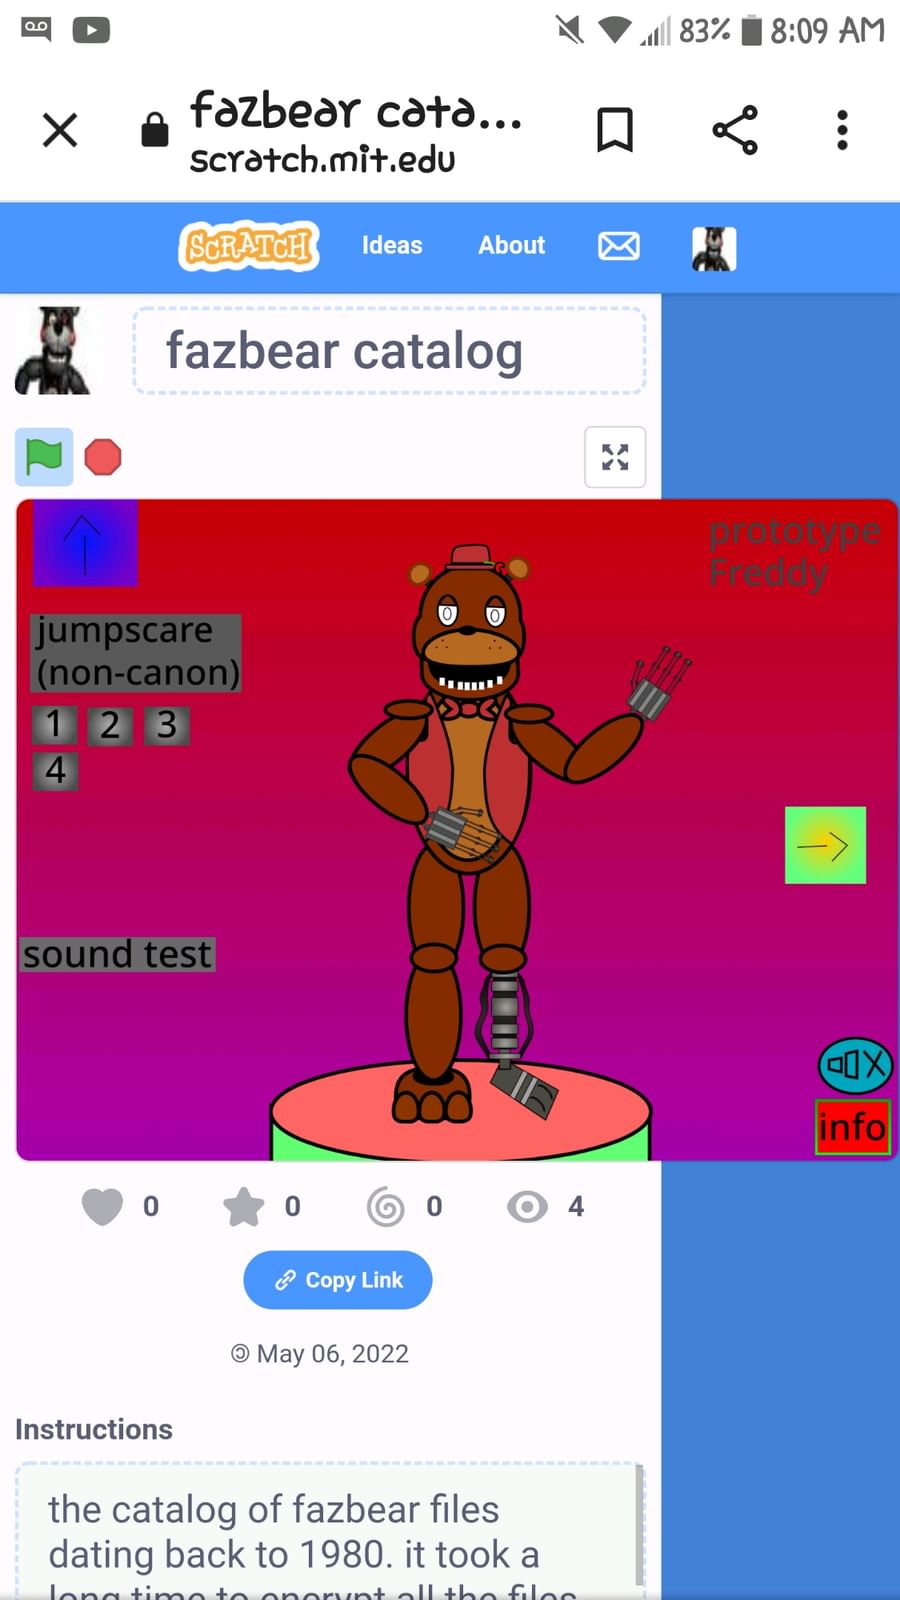 FNAF2 Scratch all Nights! Toy Chica jumpscare gif on Make a GIF